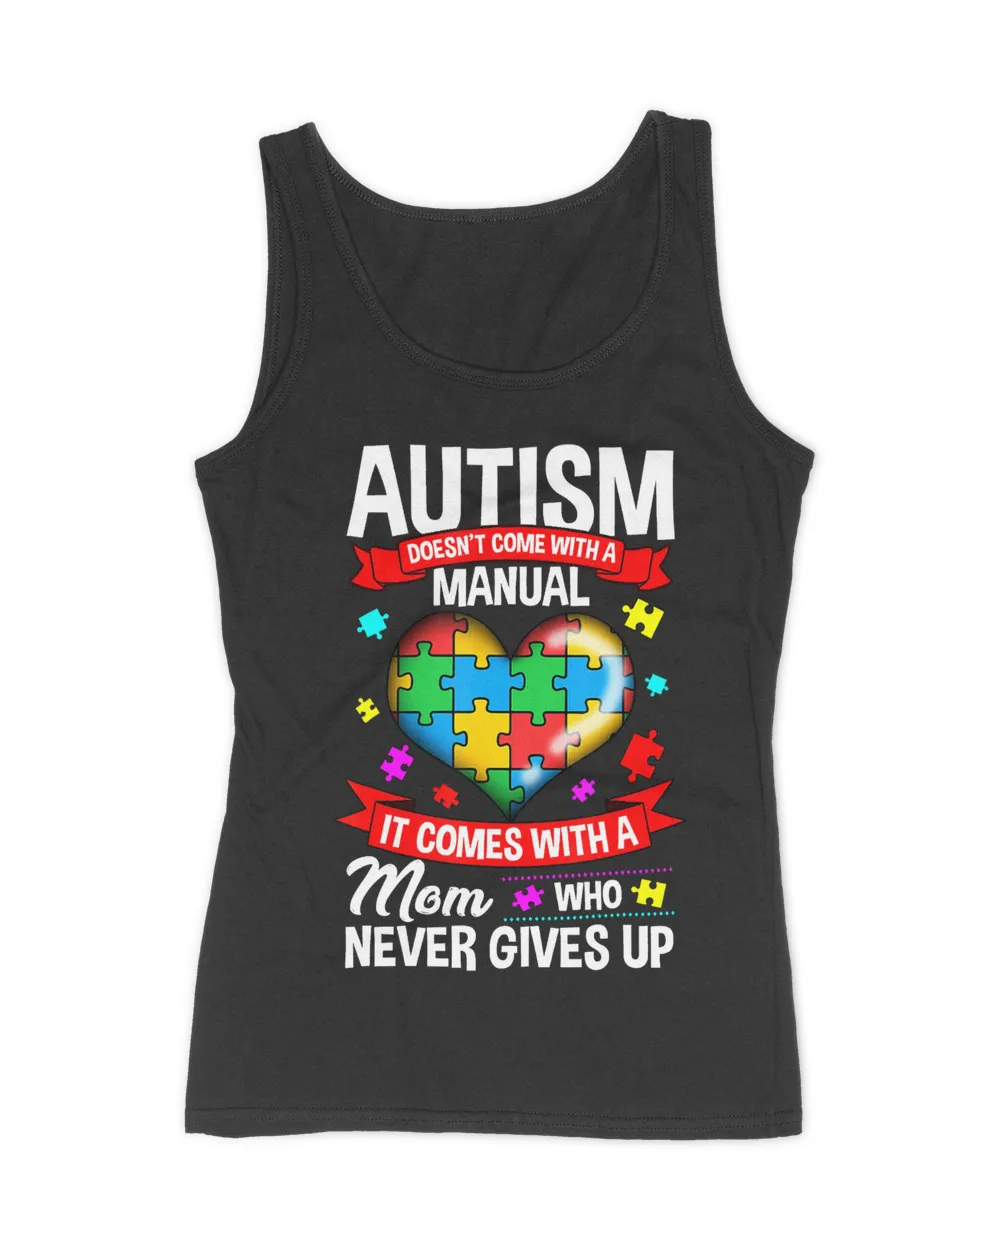 Autism Doesnt Come With A Manual A Mom Who Never Gives Up Awareness 3t4